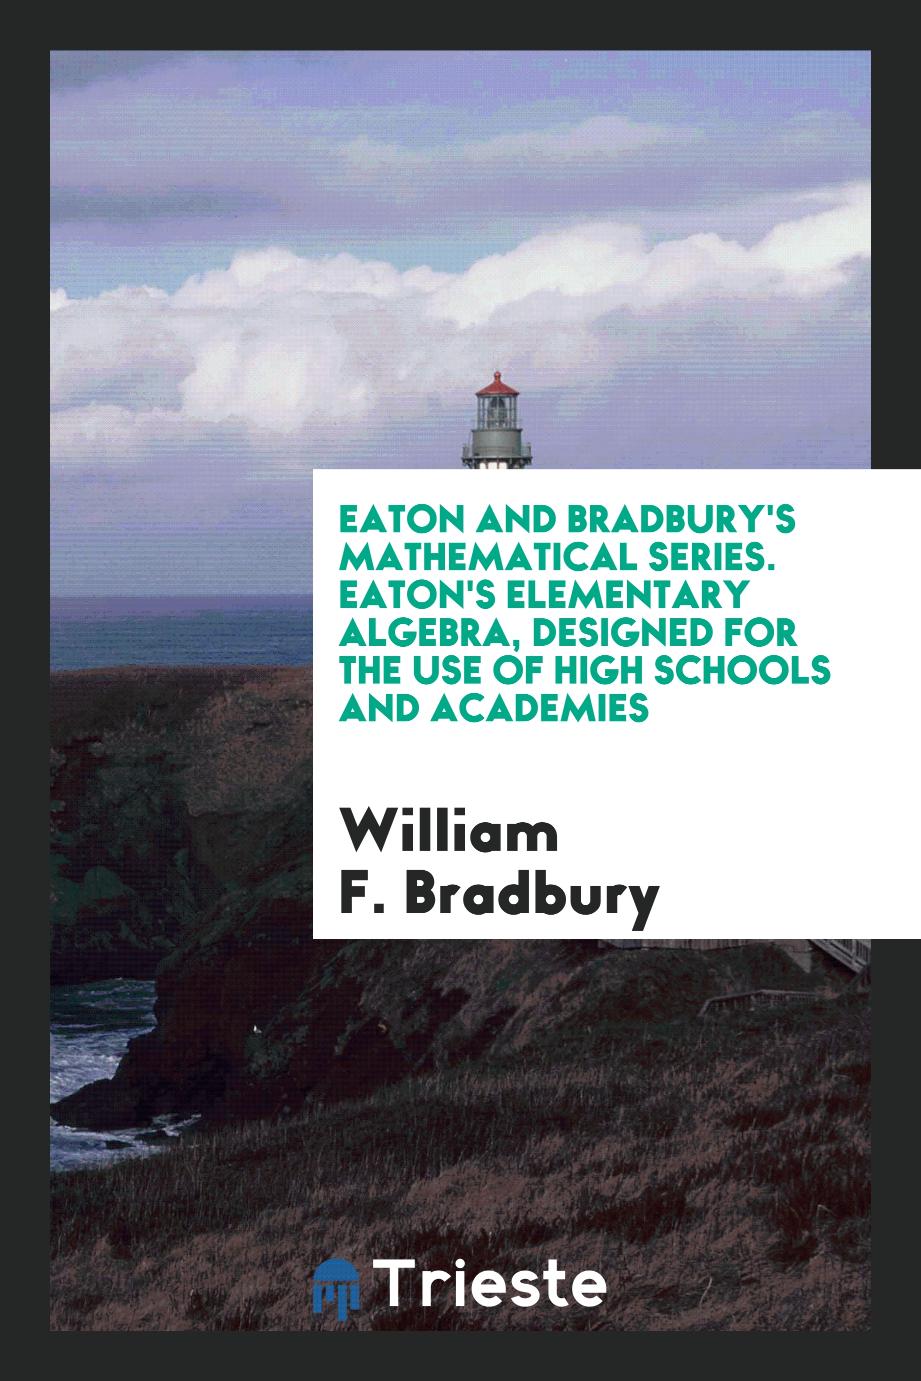 Eaton and Bradbury's Mathematical Series. Eaton's Elementary Algebra, Designed for the Use of High Schools and Academies